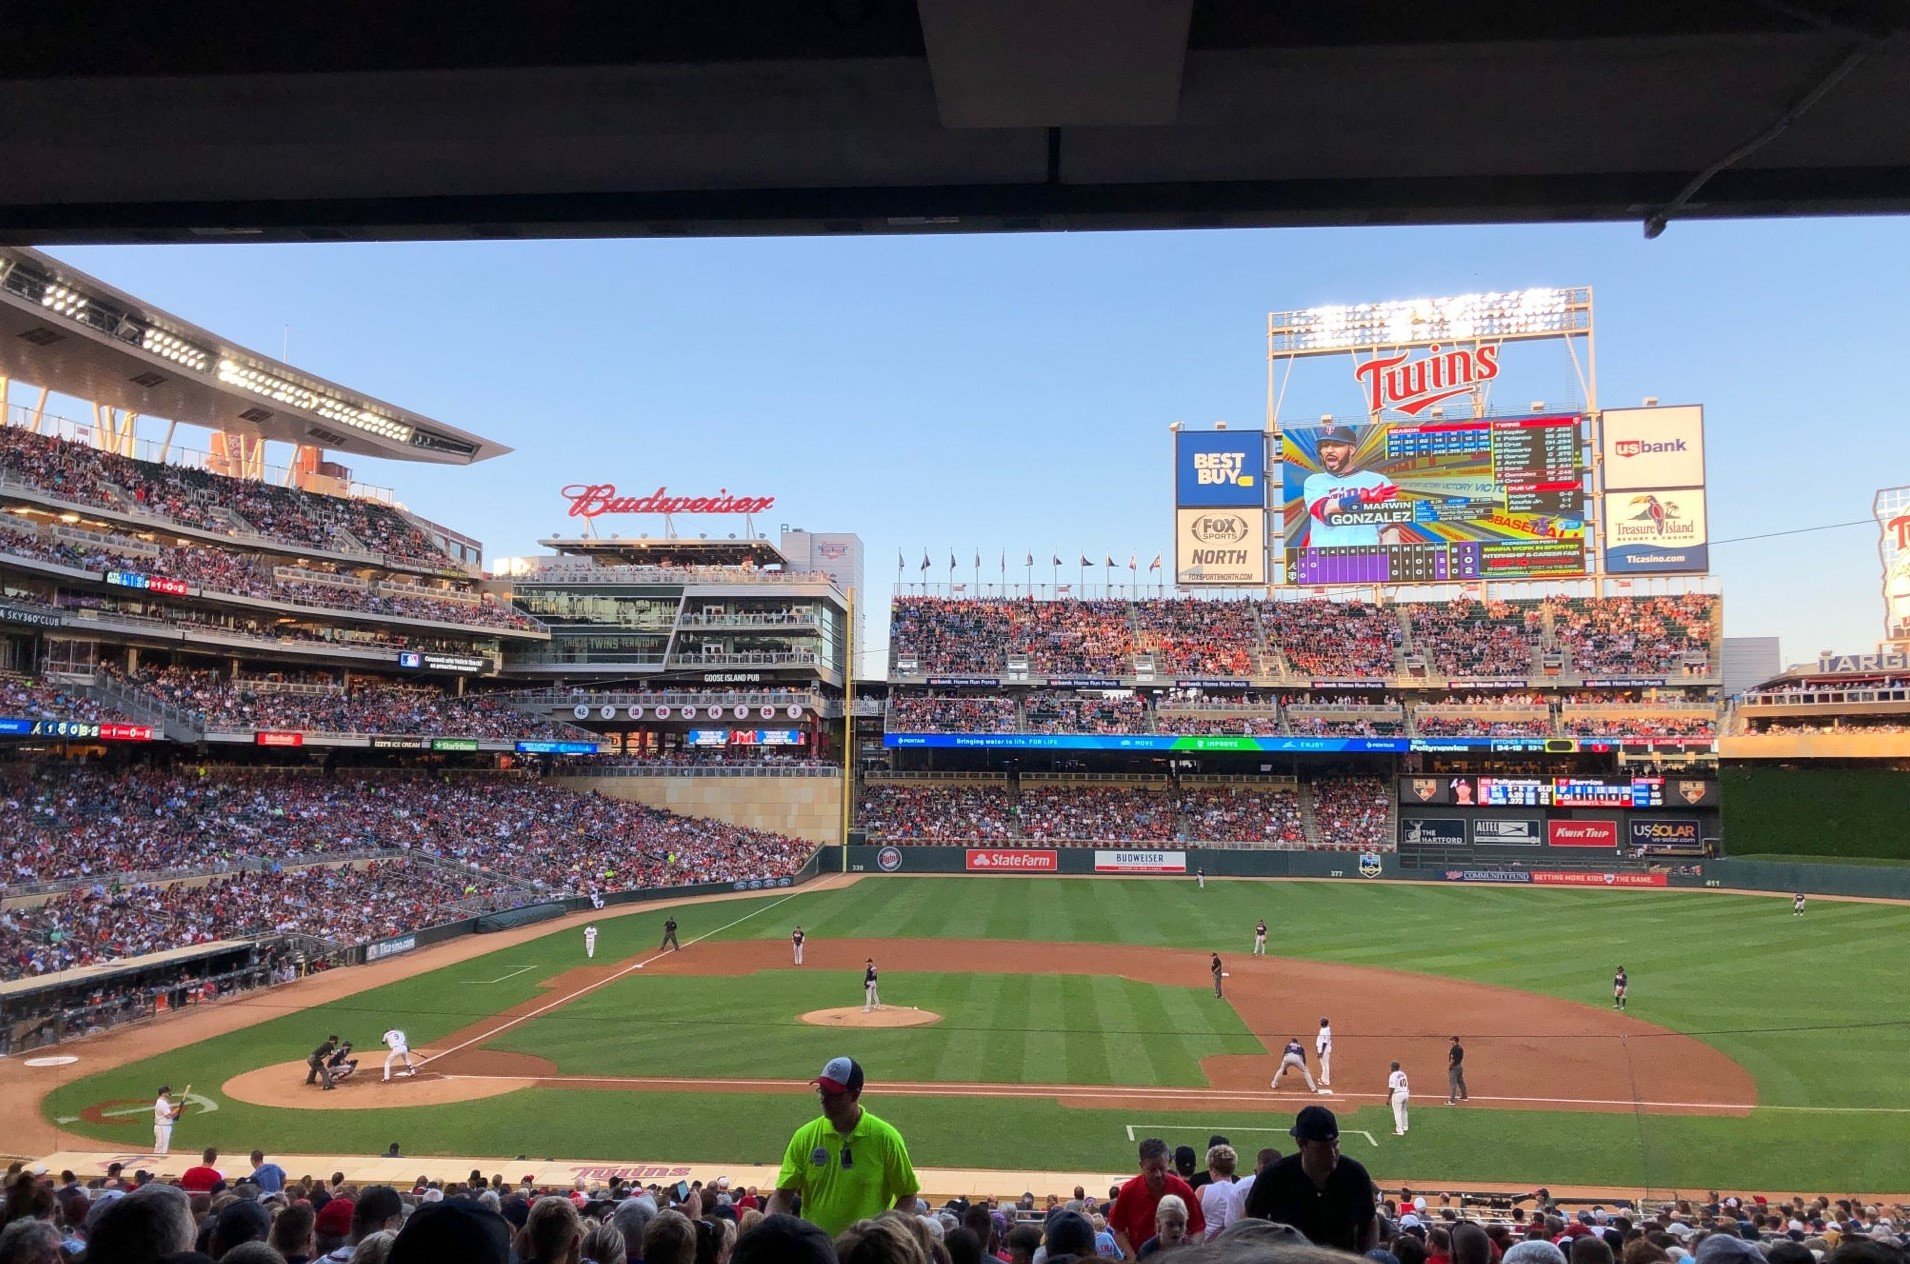 Check Out The Amazing New Features at Target Field in Minnesota!